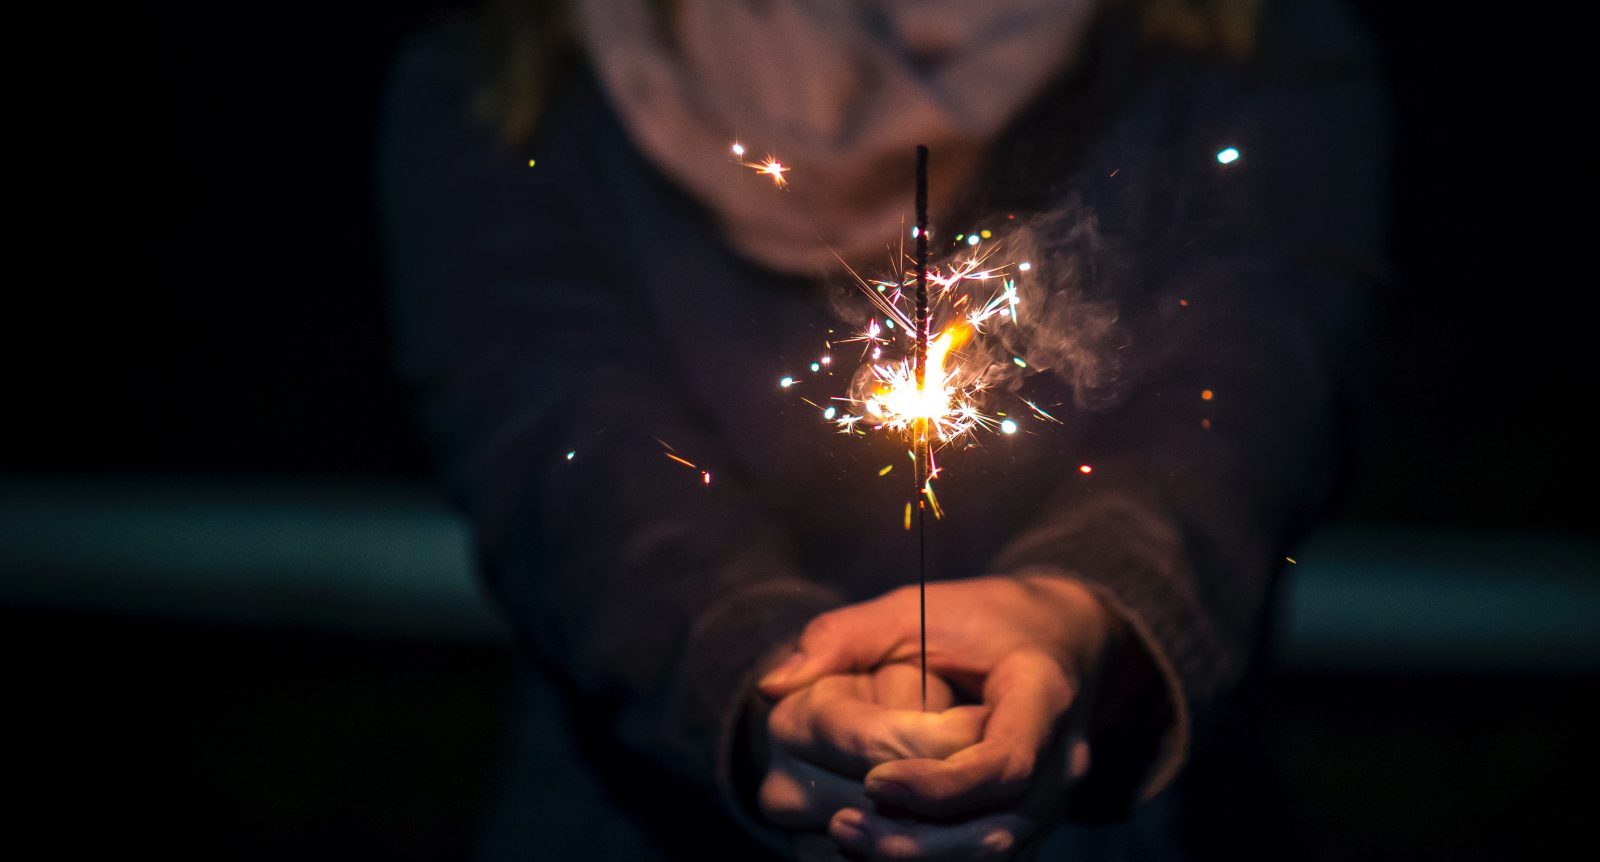 A sparkler held in a person's hands